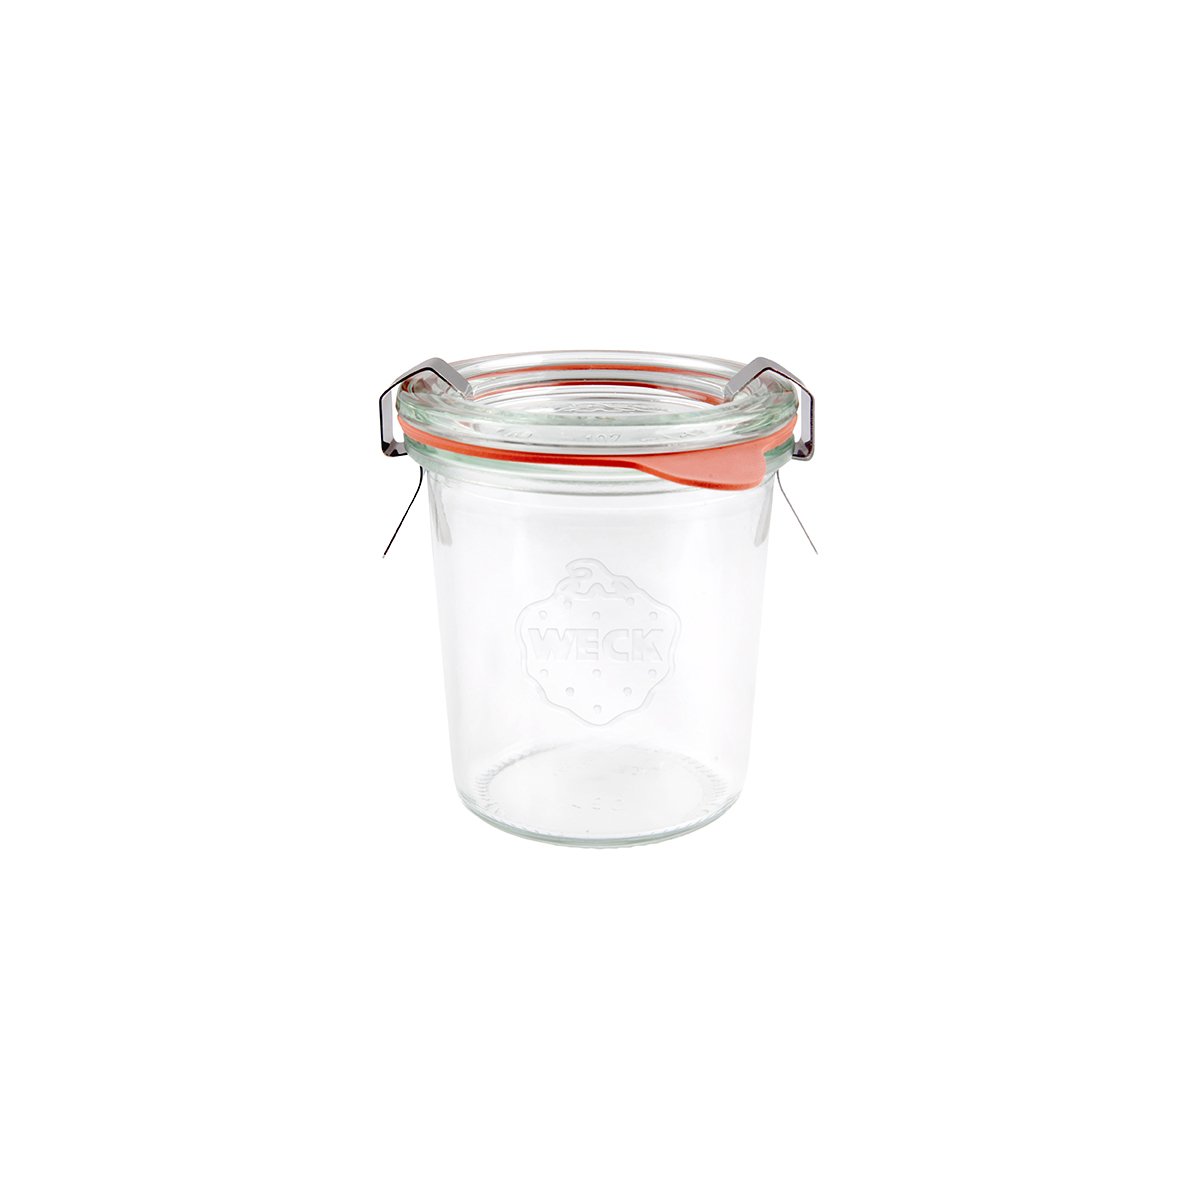 9982312 Weck Complete Glass Jar with Lid & Seal 60x70mm / 140ml Tomkin Australia Hospitality Supplies